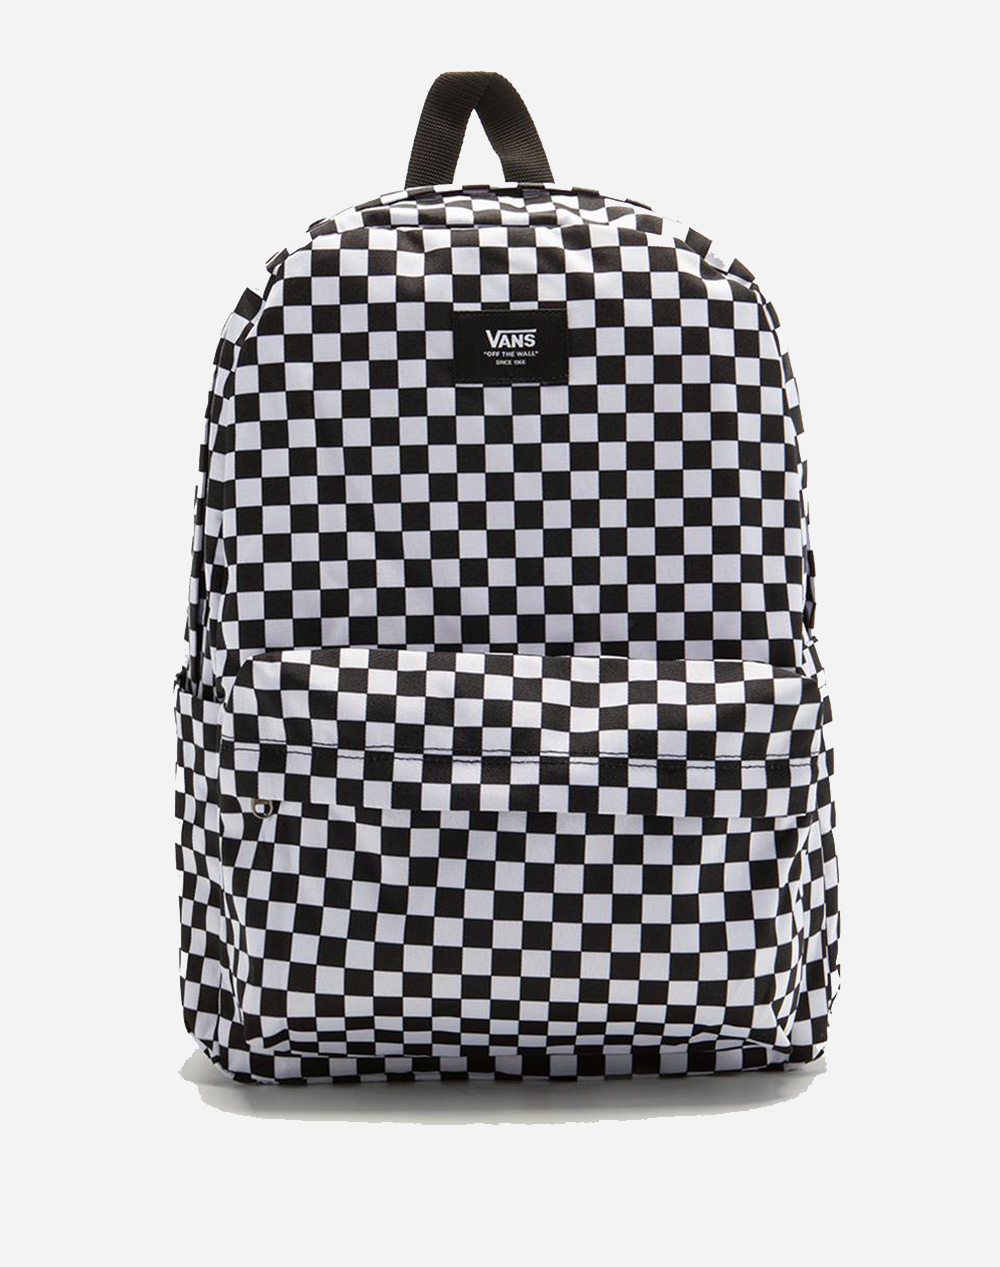 VANS Old Skool Check Backpack VN000H4XY281-VNY28 Mixed